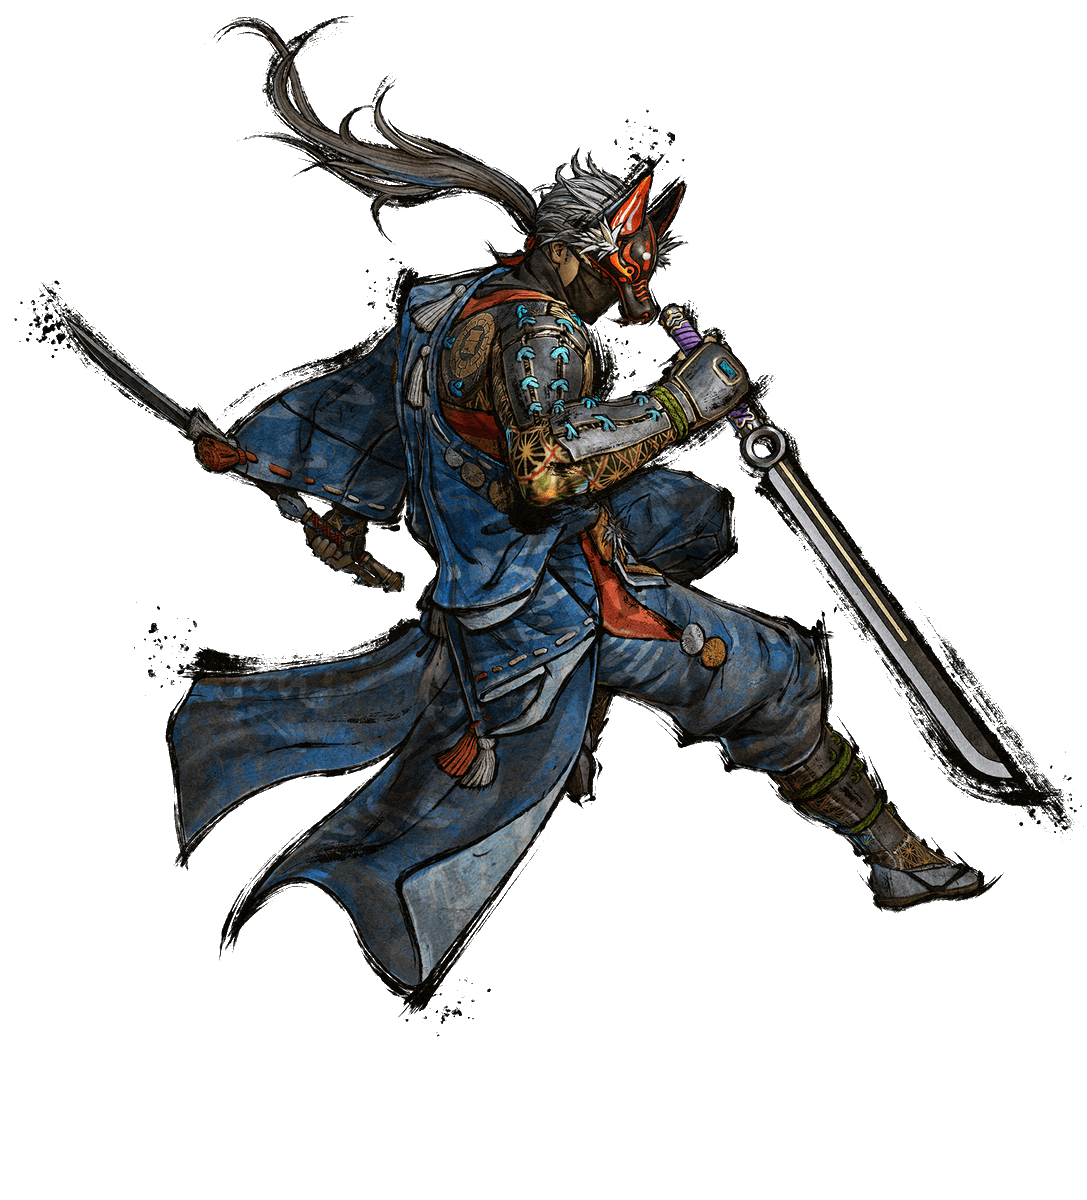 Hanzo Hattori: SW4 design was very good upon closer inspection, but definitely not ideal lolNow we have a fusion of Nioh's Hanzo and DMC's Vergil, complete with a sick new mask and a rad weapon. He still has the Kiryu voice too8.5/10 -> 10/10